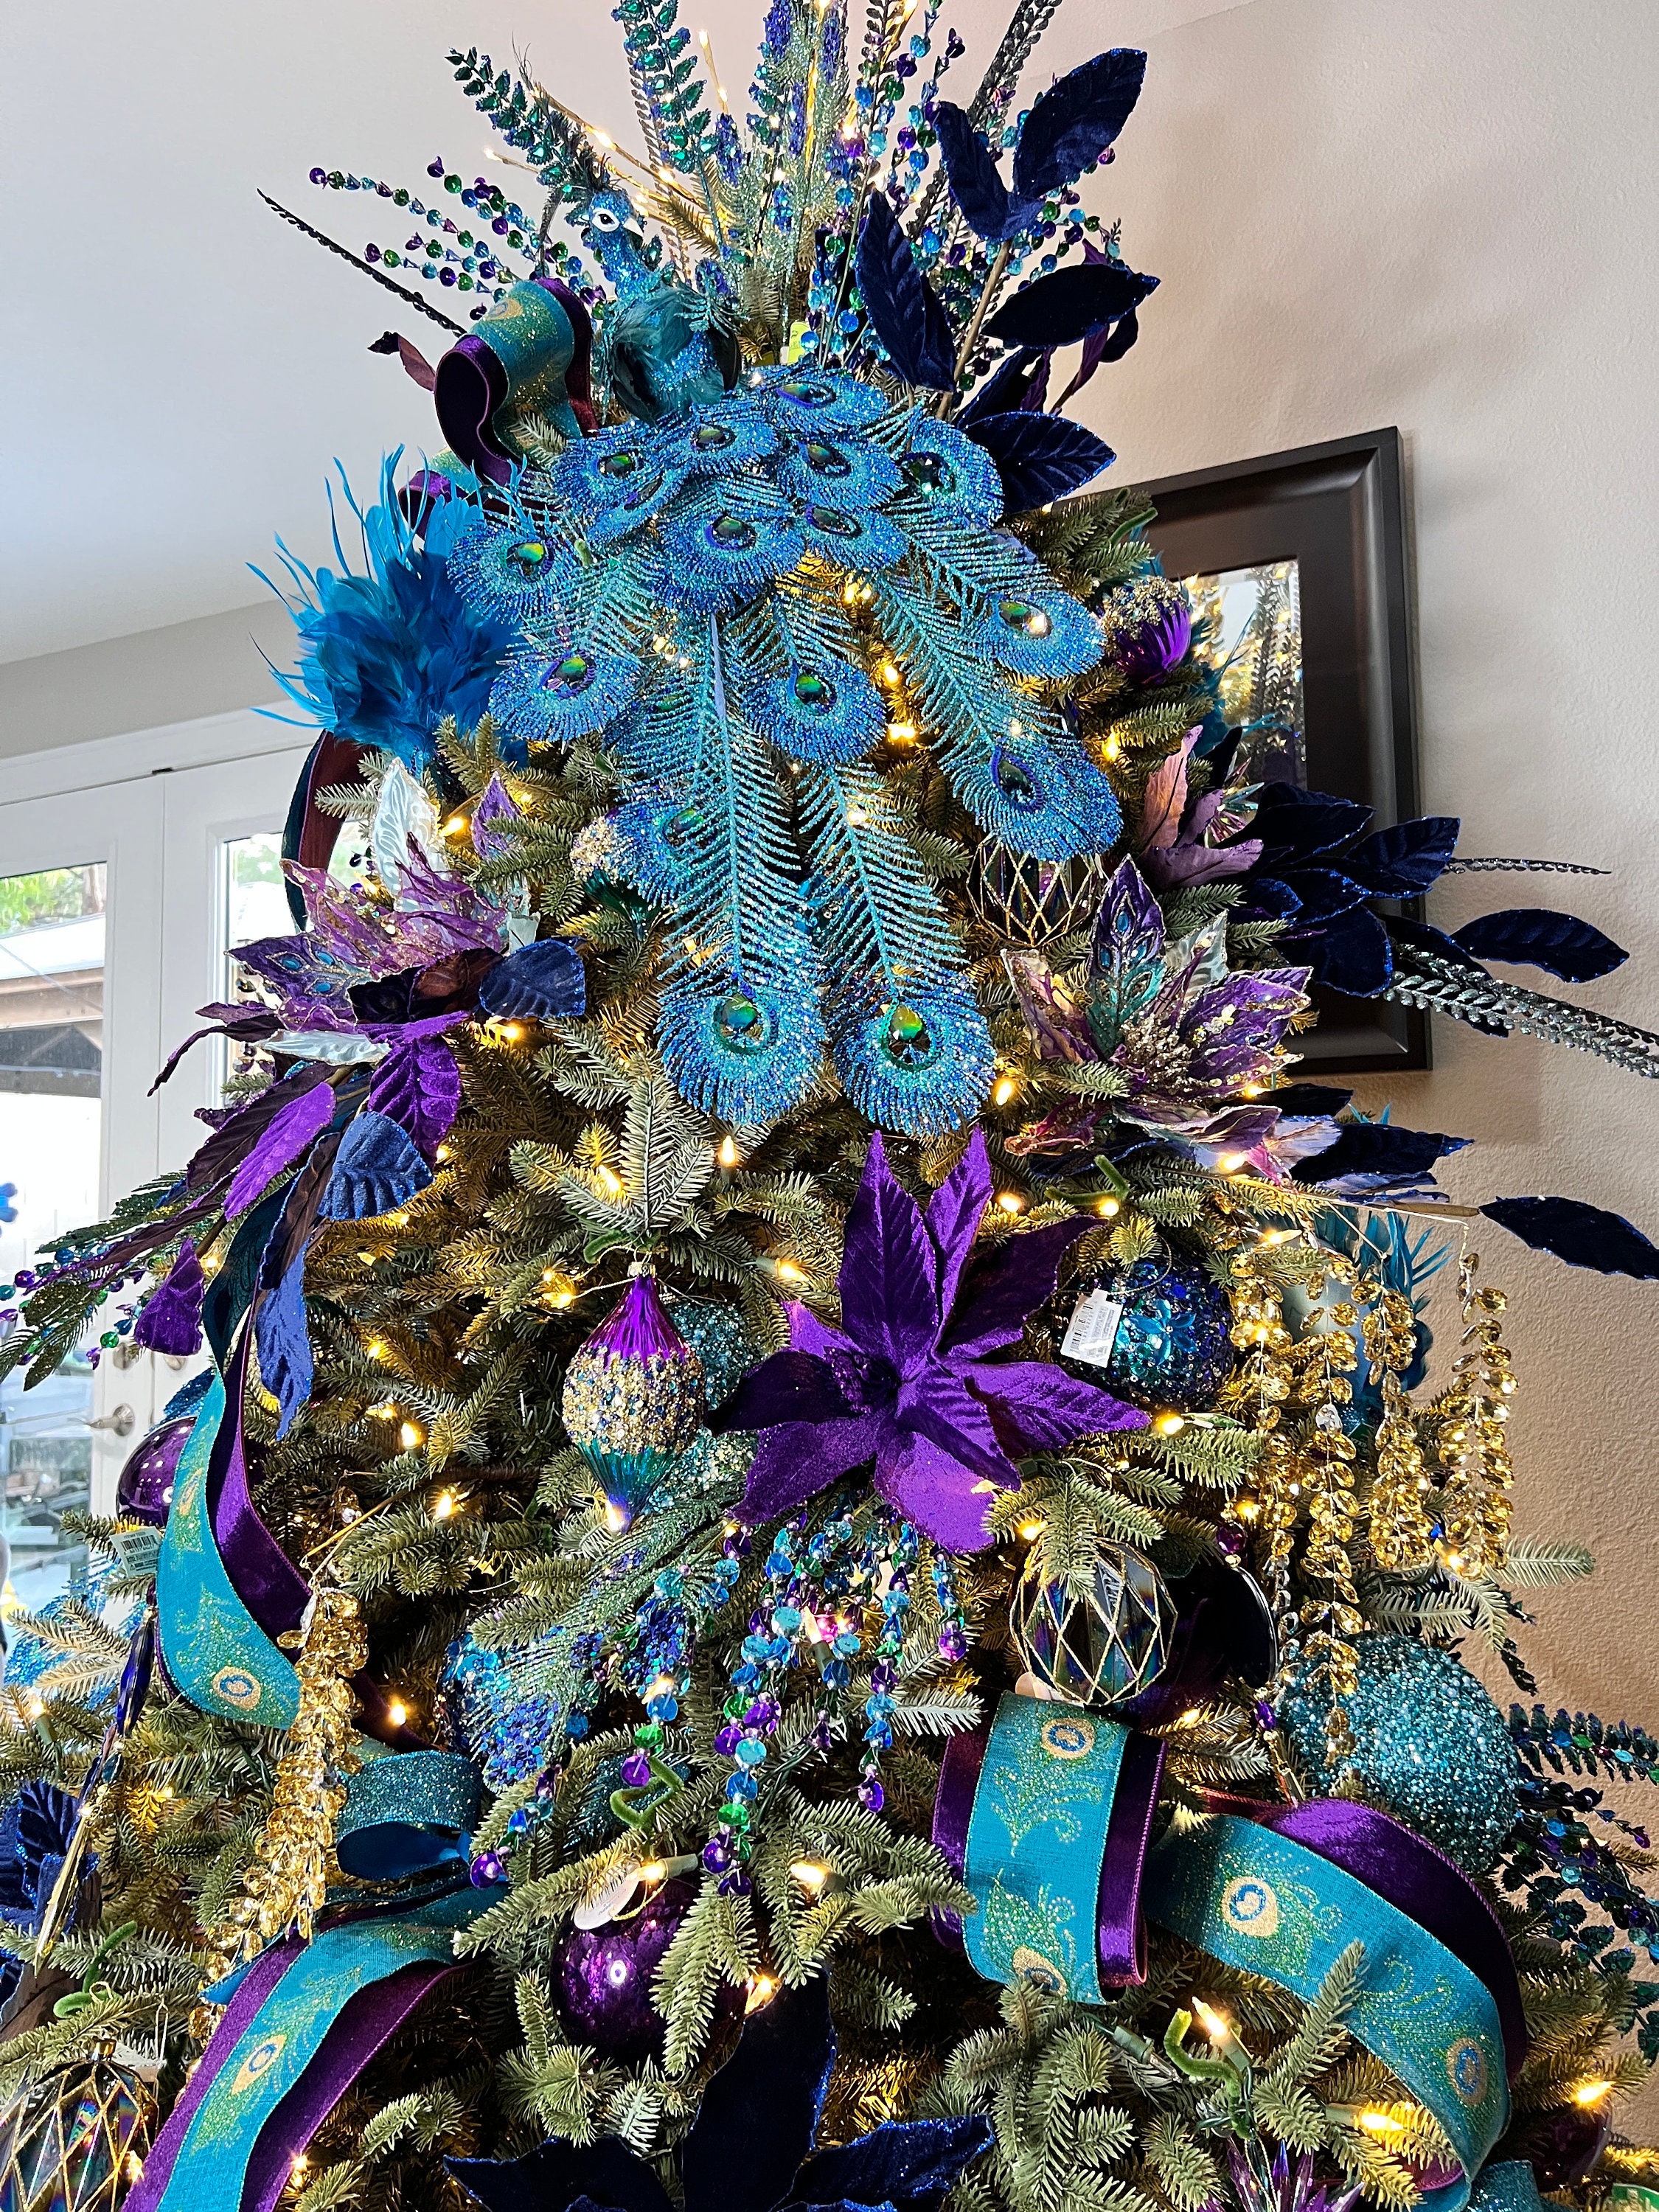 Decorations of Blue on White Christmas Tree - Southern State of